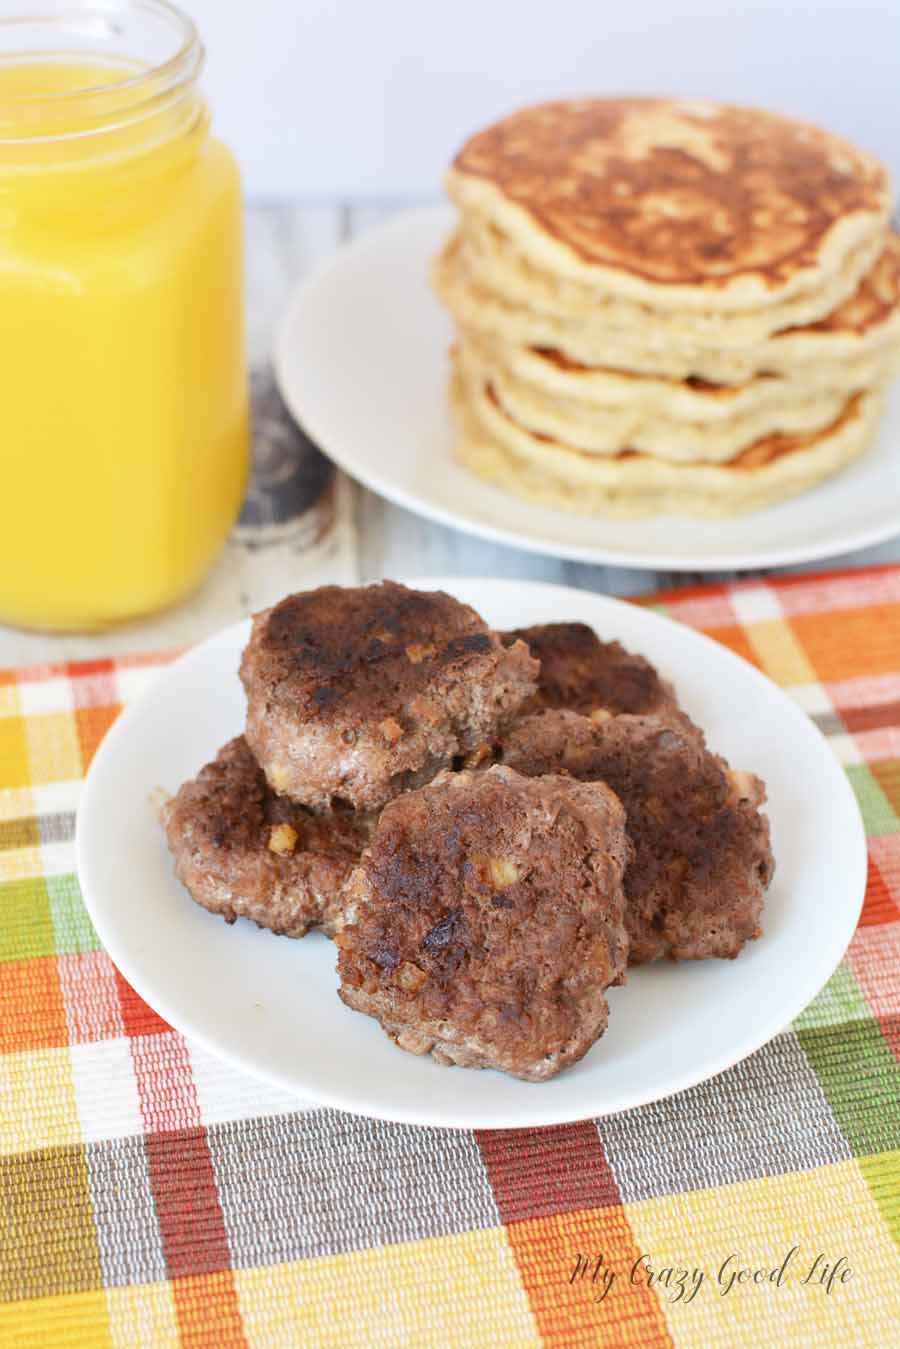 Finished sweet homemade sausage on a plate with some delicious pancakes and orange juice to go with it! 